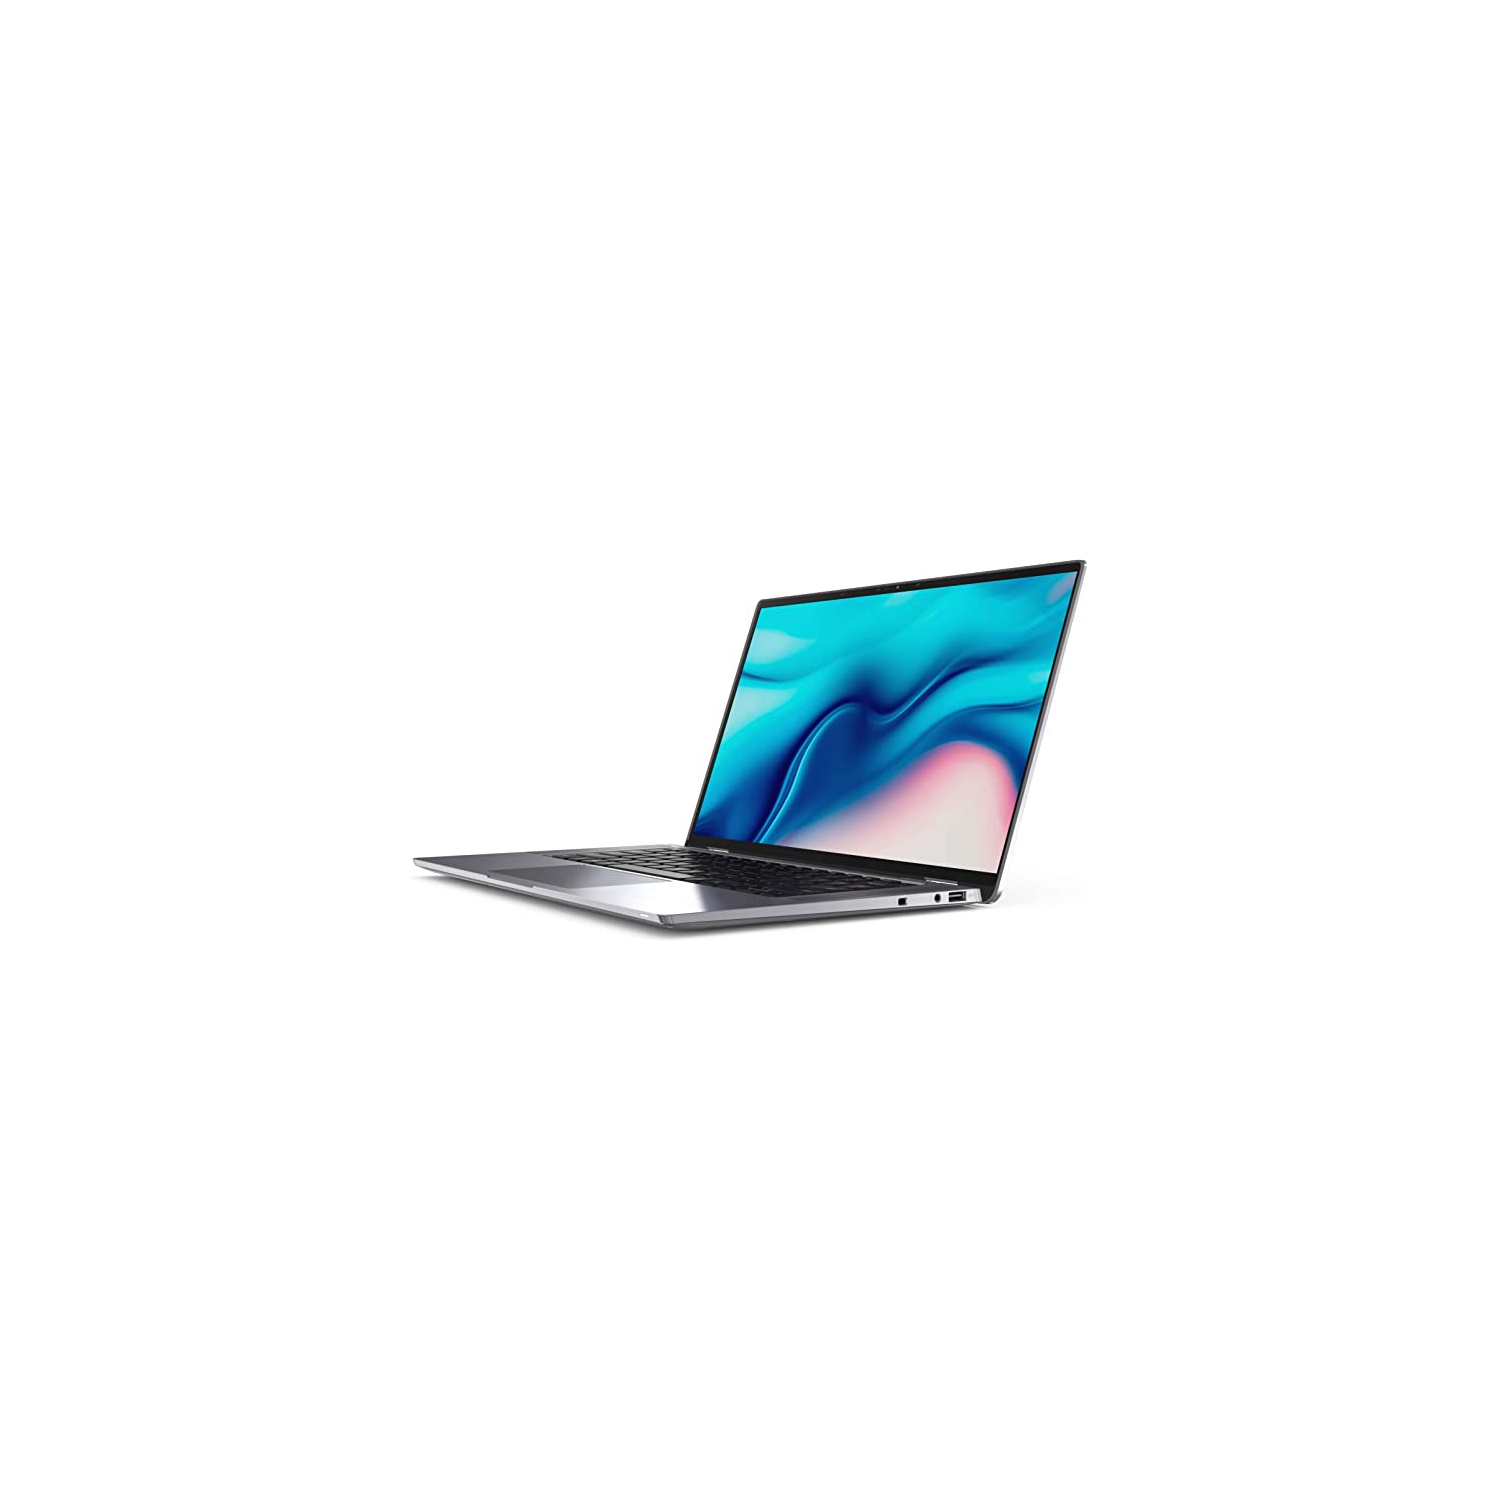 Refurbished (Excellent) - Dell Latitude 9000 9510 Laptop (2020) | 15.6" FHD | Core i7 - 512GB SSD - 16GB RAM | 6 Cores @ 4.7 GHz - 10th Gen CPU Certified Refurbished